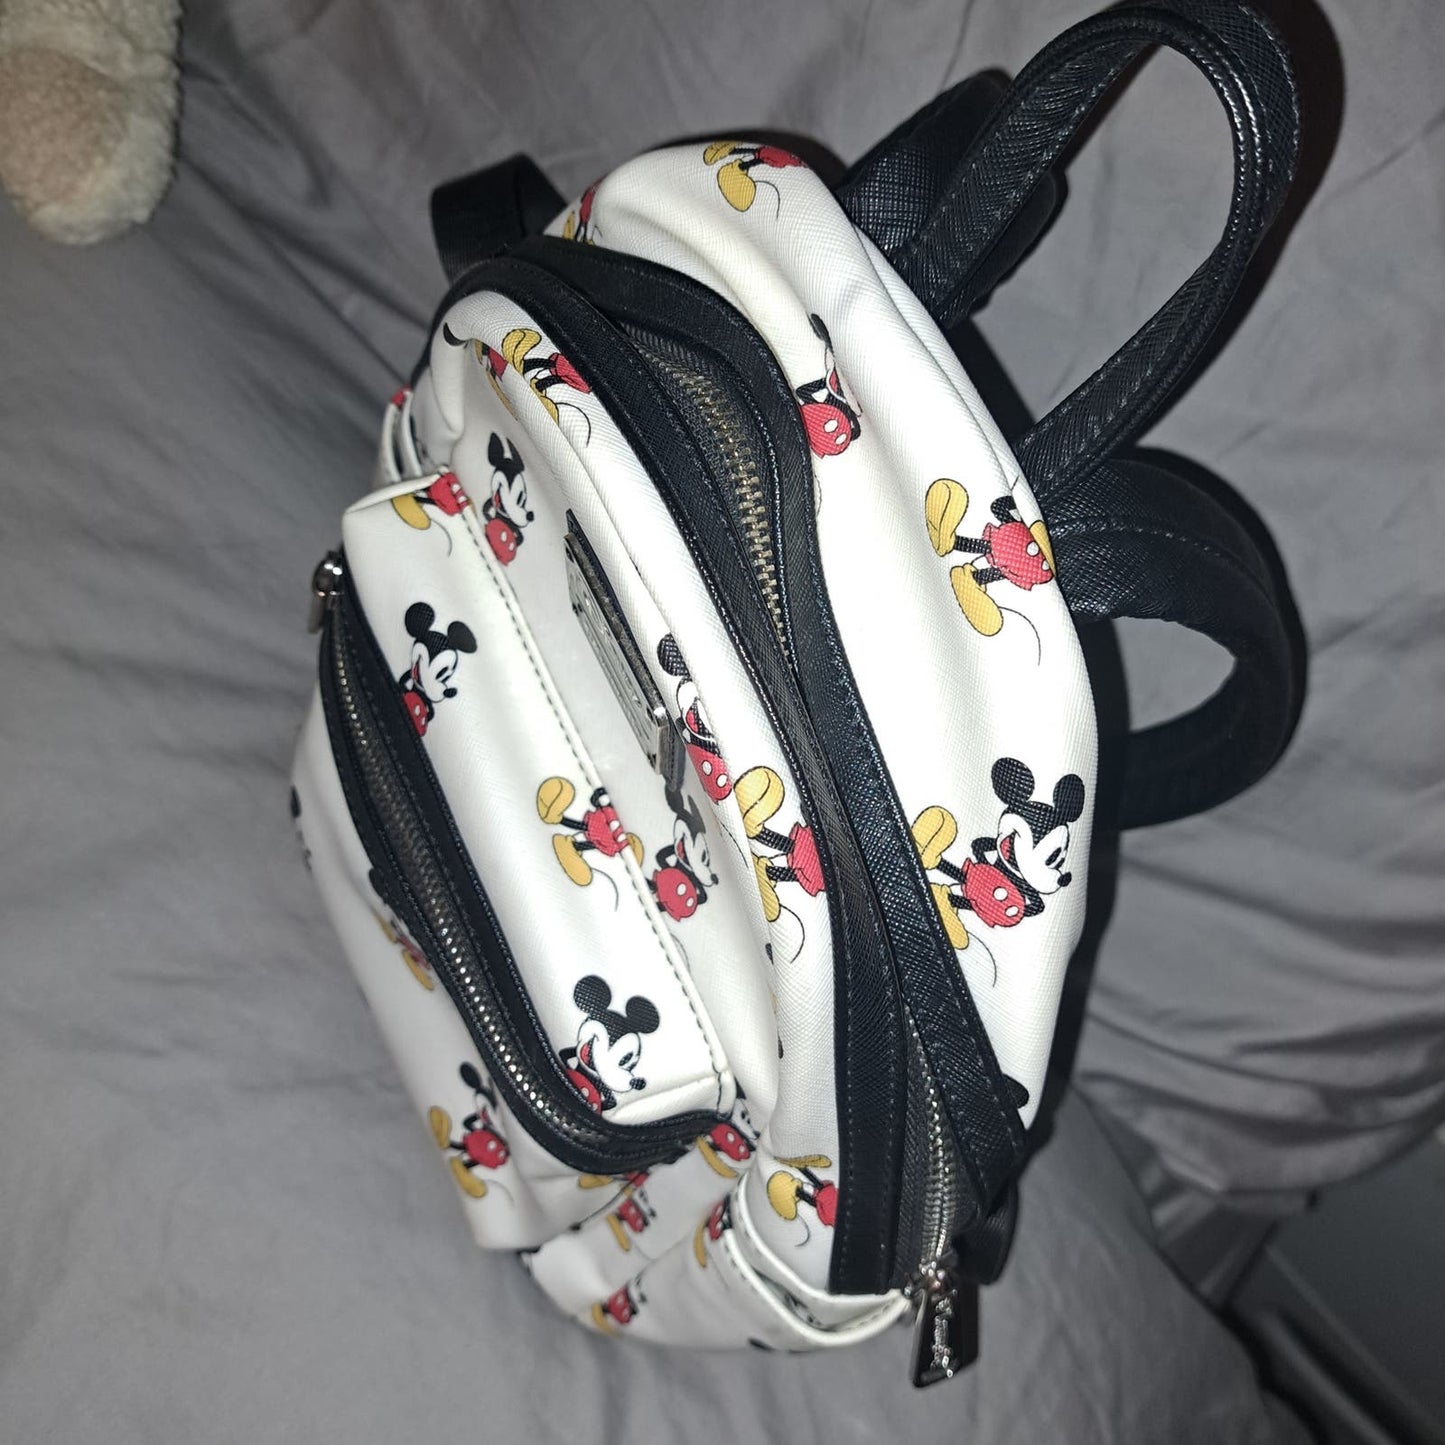 SALE!!! FUN and FABULOUS CLASSIC Mickey - LoungeFly Mini Backpack Pre-owned